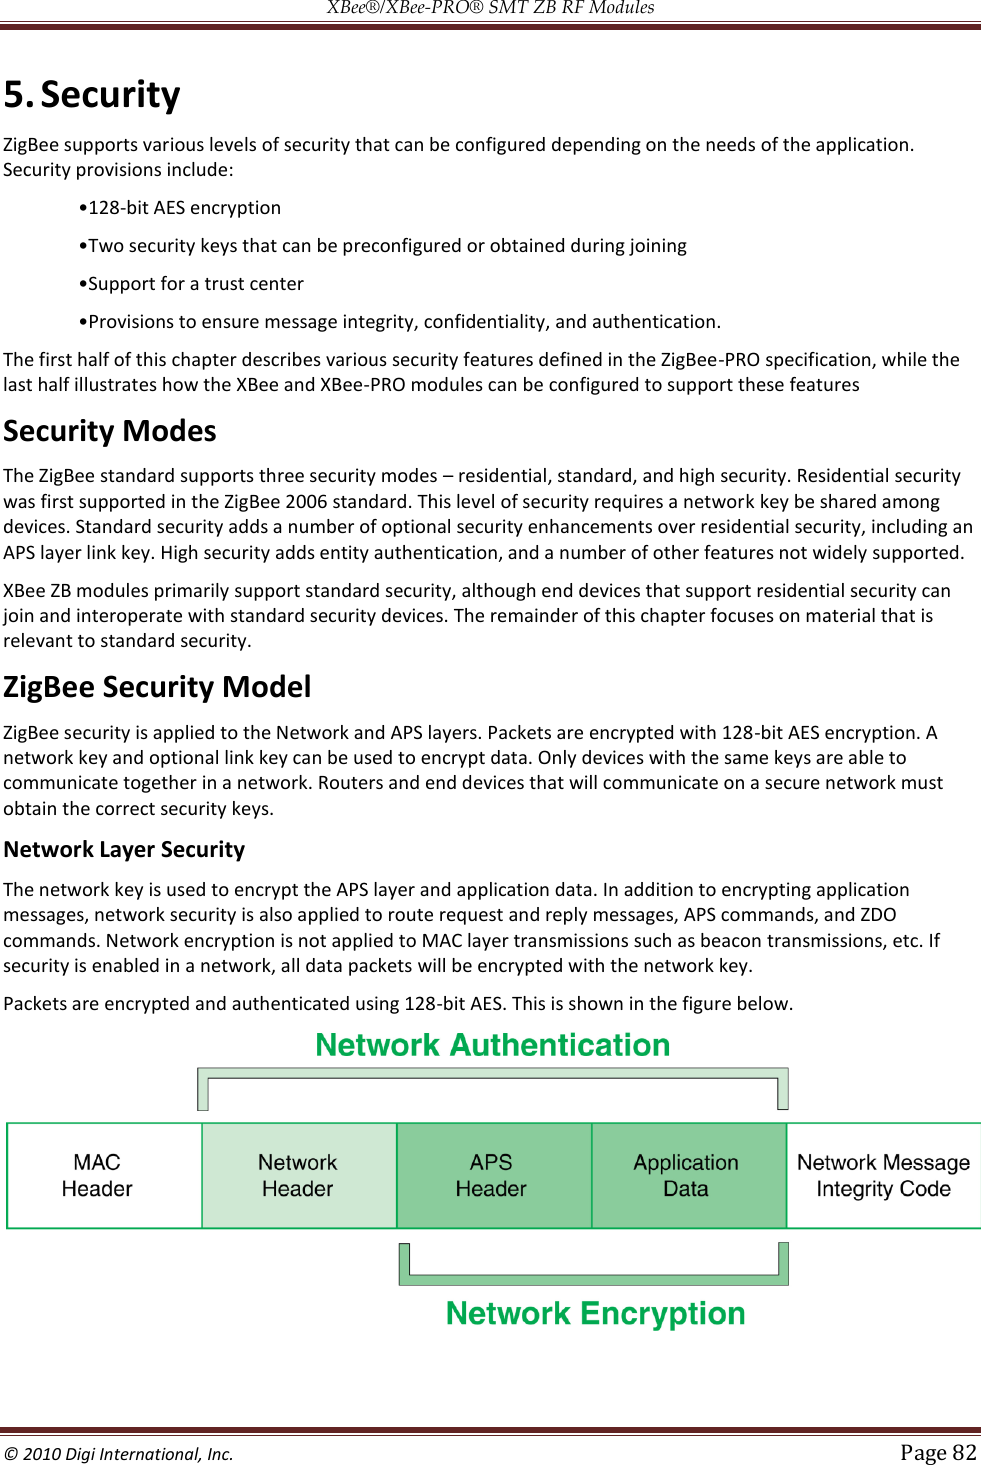 XBee®/XBee‐PRO® SMT ZB RF Modules  © 2010 Digi International, Inc.   Page 82  5. Security ZigBee supports various levels of security that can be configured depending on the needs of the application. Security provisions include: -bit AES encryption    ons to ensure message integrity, confidentiality, and authentication. The first half of this chapter describes various security features defined in the ZigBee-PRO specification, while the last half illustrates how the XBee and XBee-PRO modules can be configured to support these features Security Modes The ZigBee standard supports three security modes  residential, standard, and high security. Residential security was first supported in the ZigBee 2006 standard. This level of security requires a network key be shared among devices. Standard security adds a number of optional security enhancements over residential security, including an APS layer link key. High security adds entity authentication, and a number of other features not widely supported. XBee ZB modules primarily support standard security, although end devices that support residential security can join and interoperate with standard security devices. The remainder of this chapter focuses on material that is relevant to standard security. ZigBee Security Model ZigBee security is applied to the Network and APS layers. Packets are encrypted with 128-bit AES encryption. A network key and optional link key can be used to encrypt data. Only devices with the same keys are able to communicate together in a network. Routers and end devices that will communicate on a secure network must obtain the correct security keys. Network Layer Security The network key is used to encrypt the APS layer and application data. In addition to encrypting application messages, network security is also applied to route request and reply messages, APS commands, and ZDO commands. Network encryption is not applied to MAC layer transmissions such as beacon transmissions, etc. If security is enabled in a network, all data packets will be encrypted with the network key. Packets are encrypted and authenticated using 128-bit AES. This is shown in the figure below.   